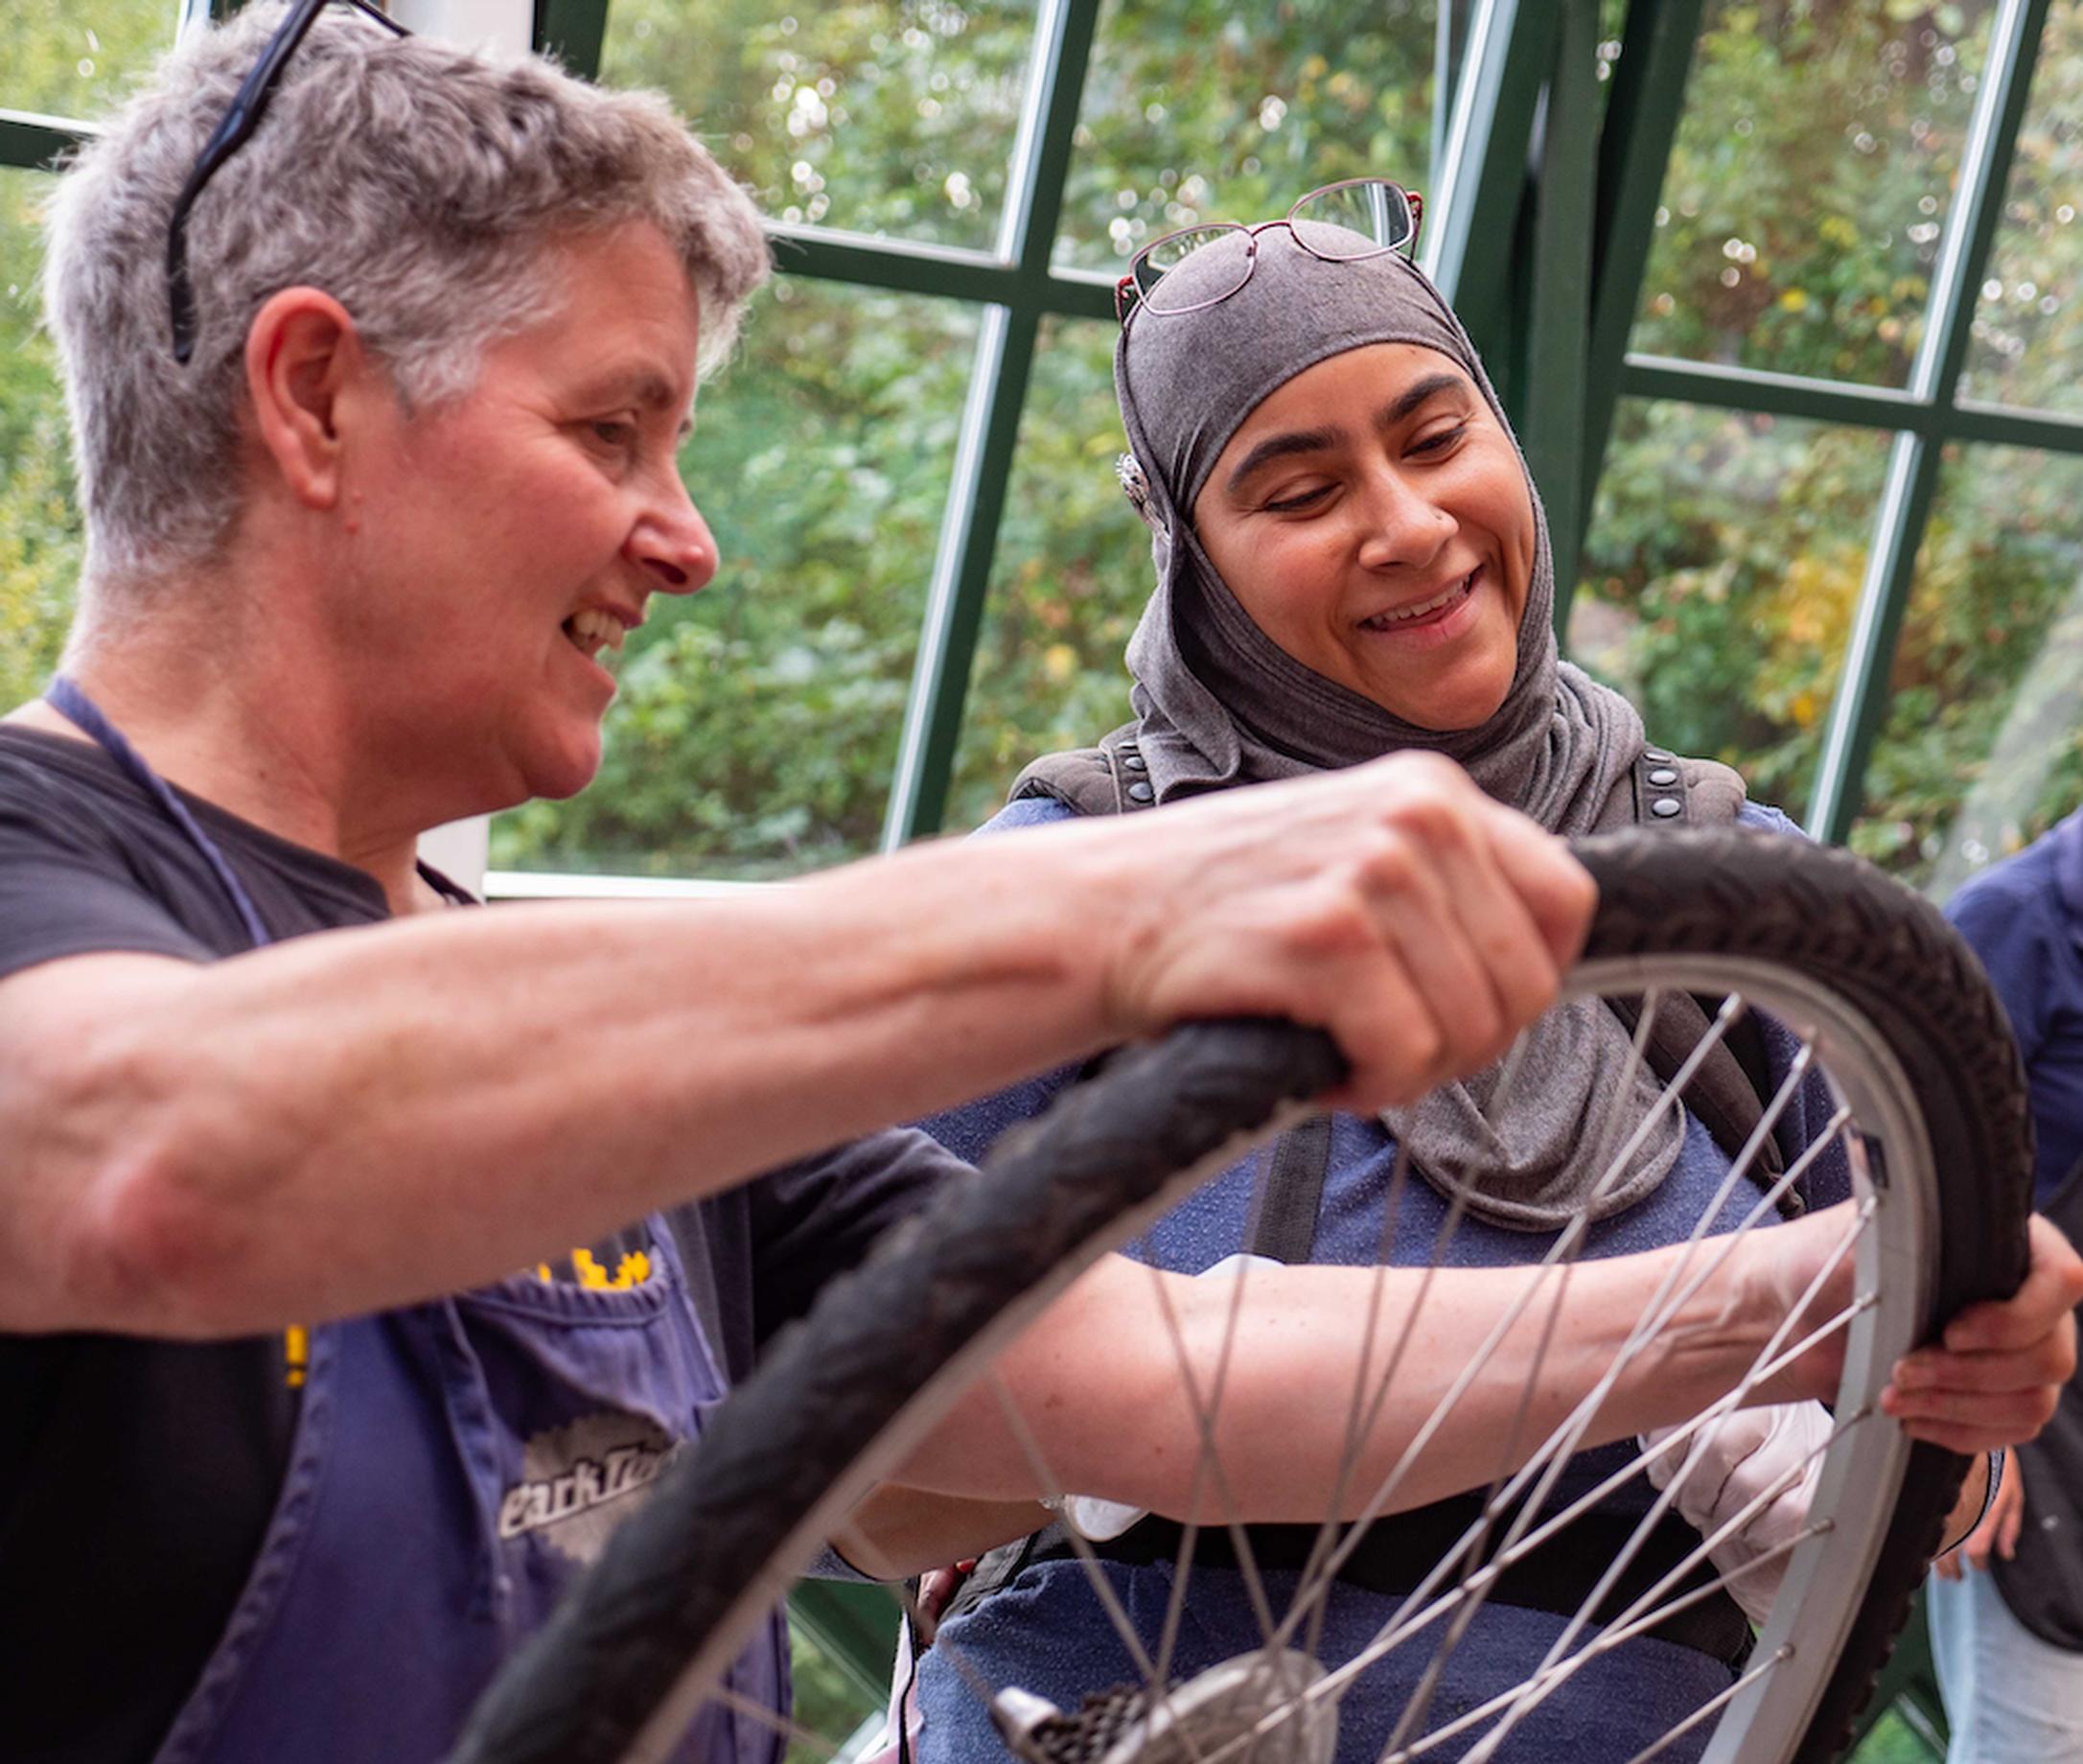 Direct action is needed to make it socially acceptable to cycle. This will help broaden its appeal to people of all ages, backgrounds and abilities